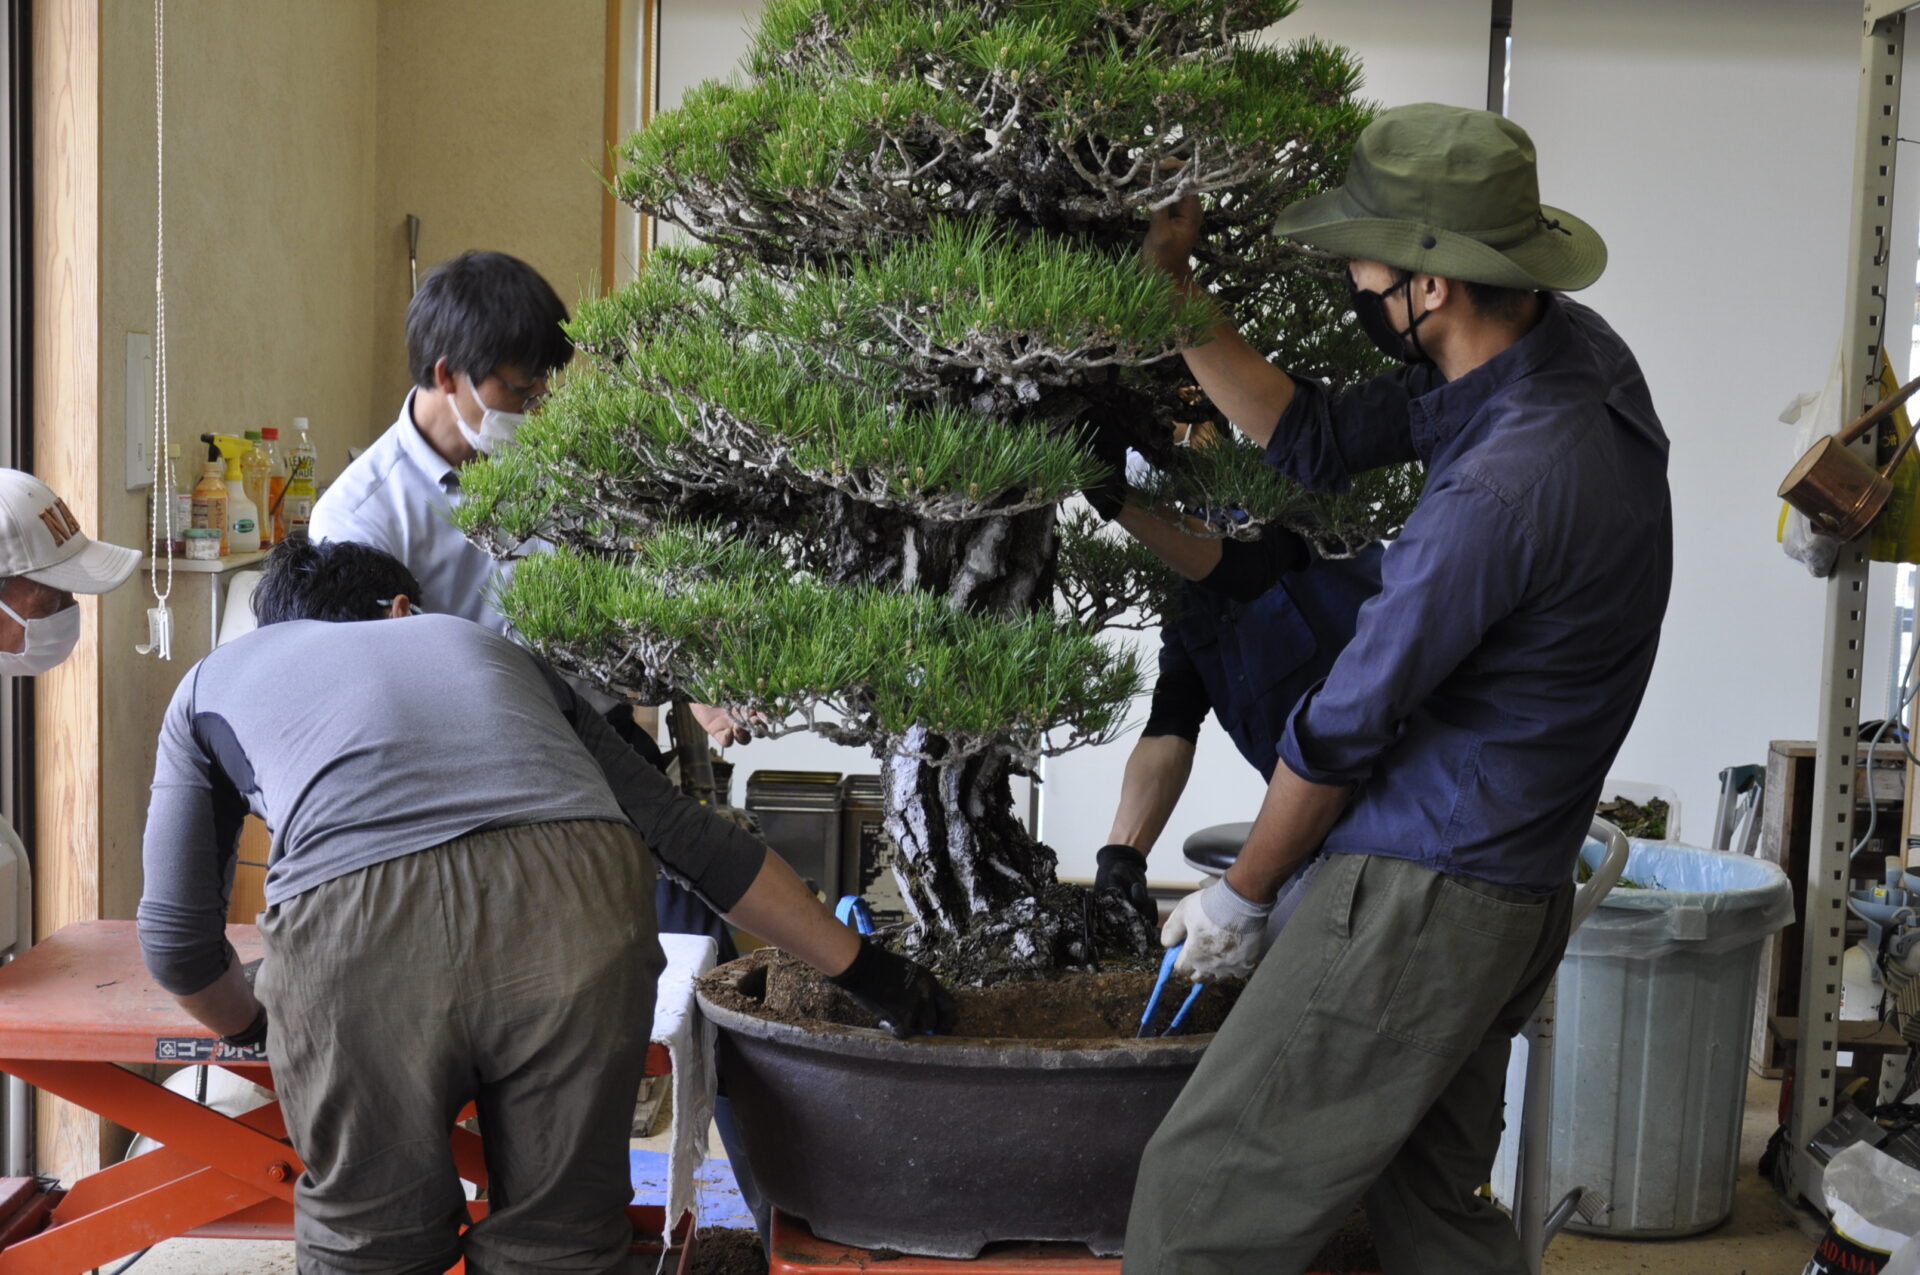 Taking the Japanese black pine from the pot.